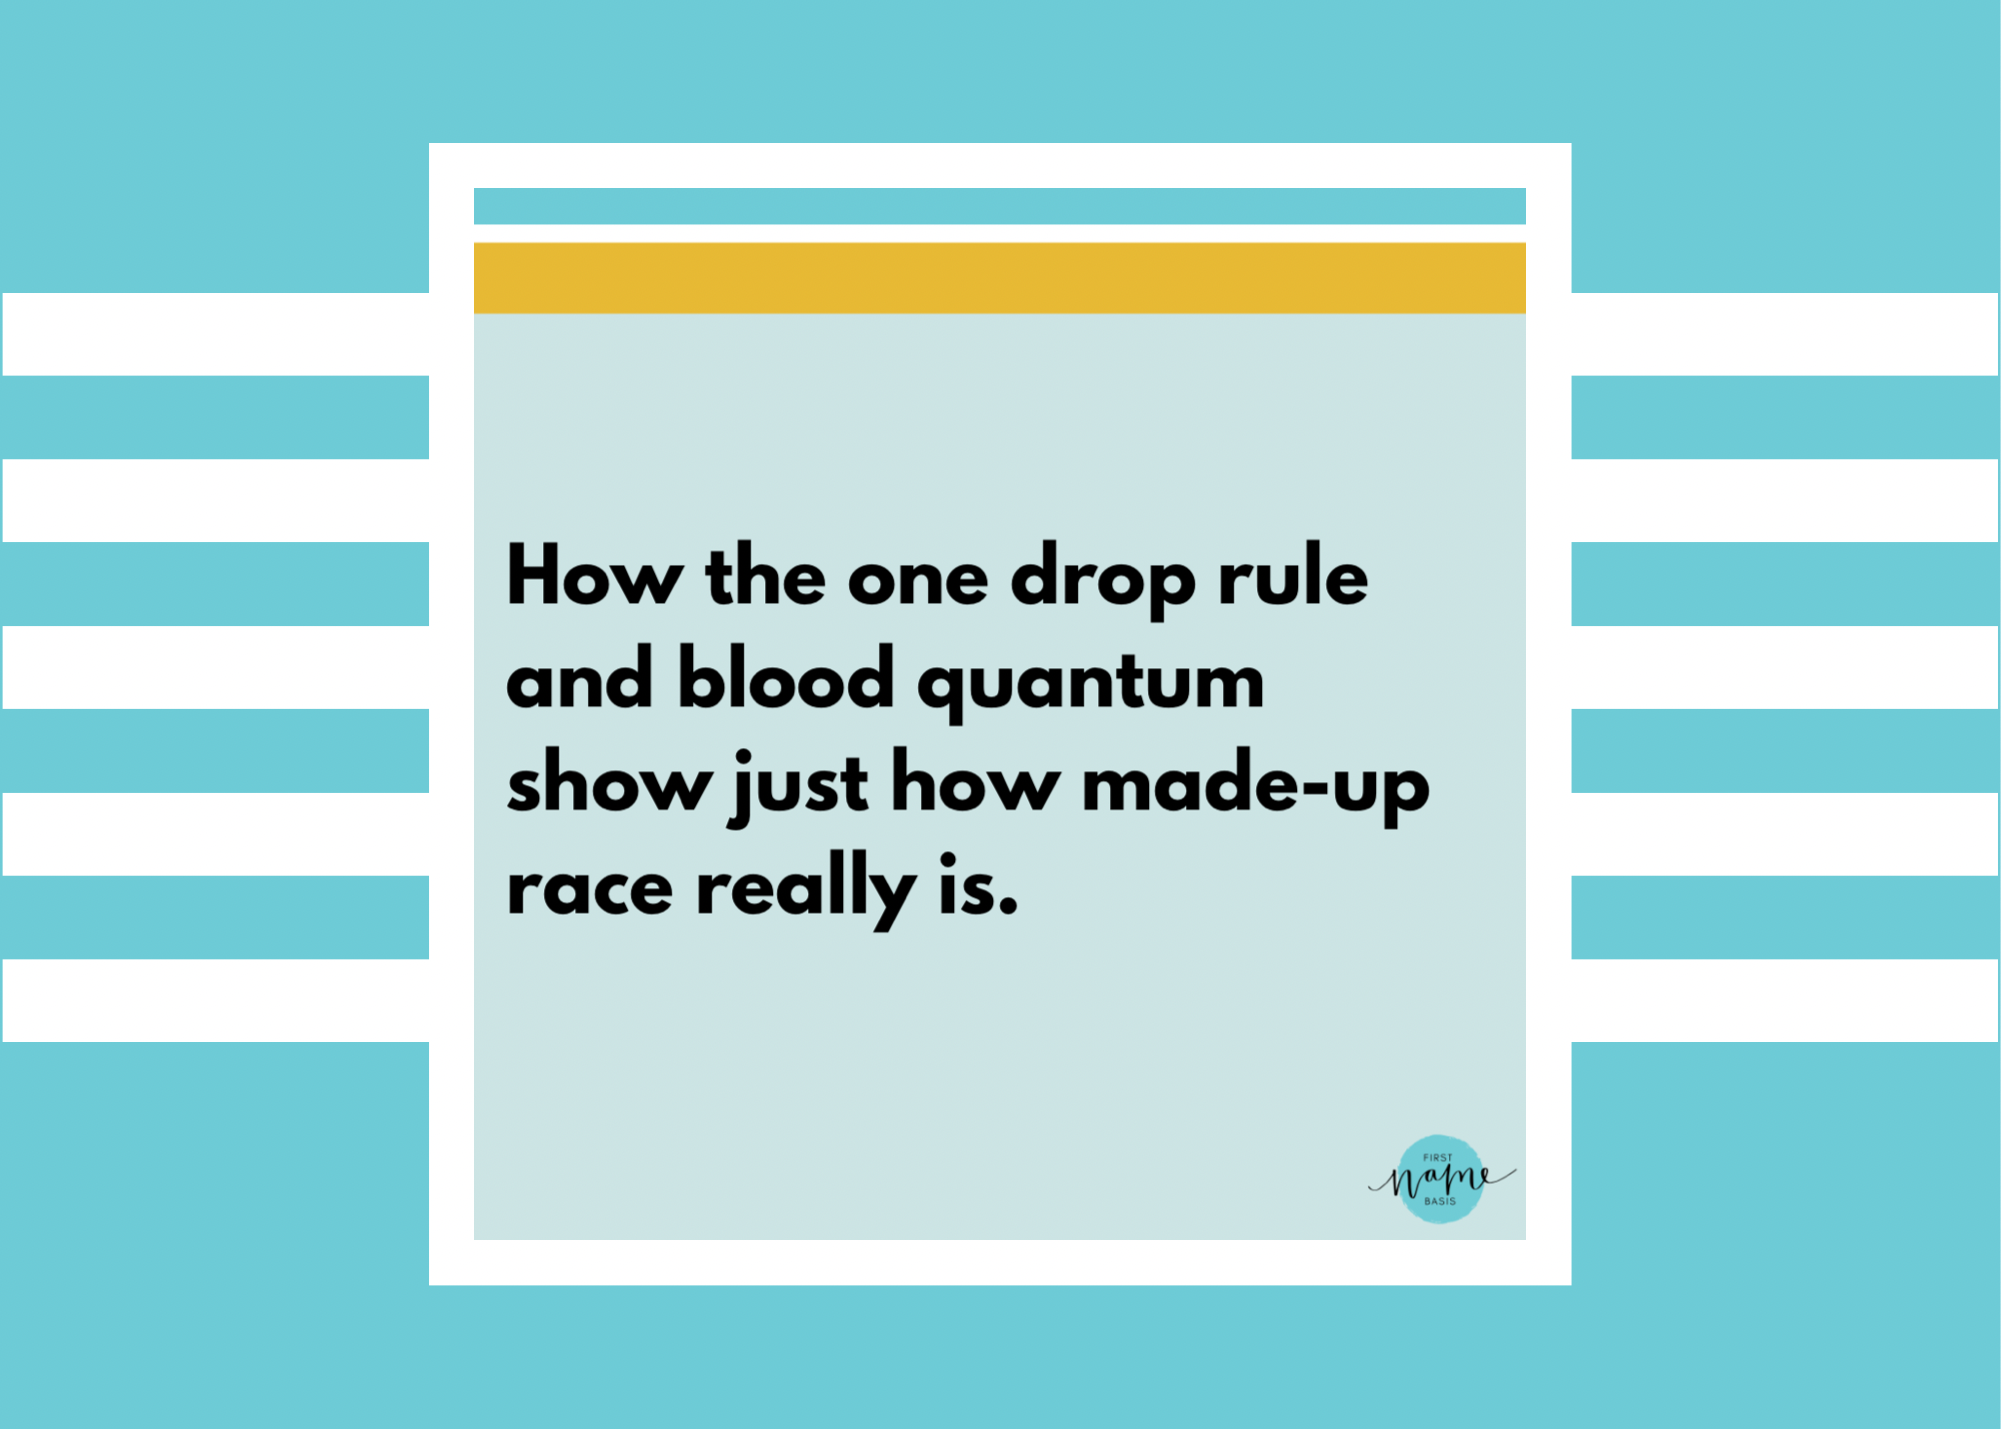 How the One Drop Rule and Blood Quantum Show Just How Made-Up Race Really Is